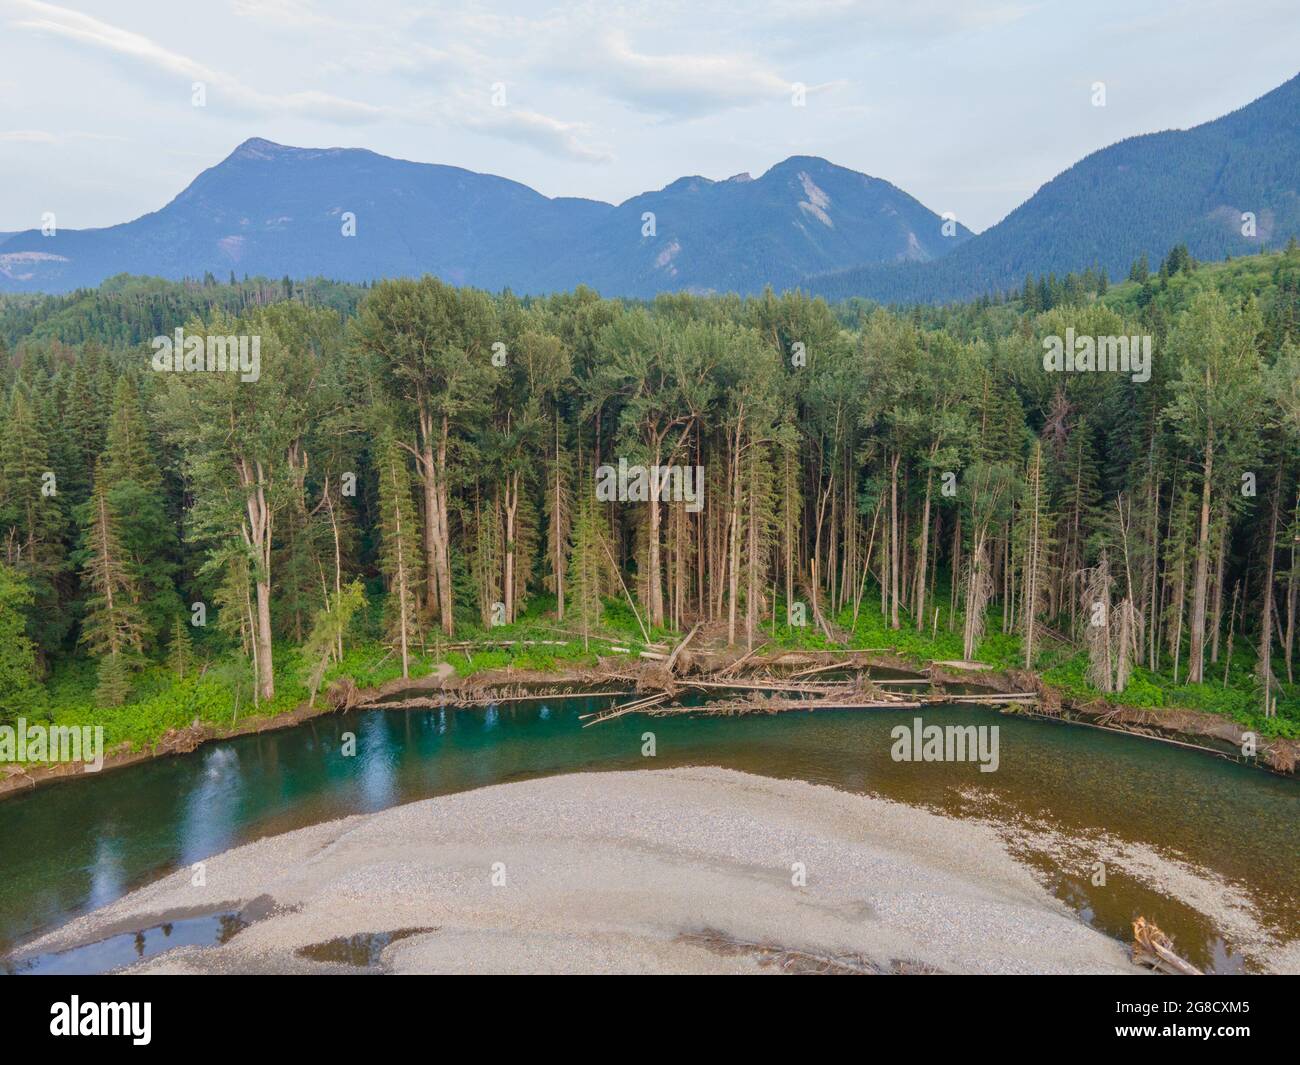 Second growth riparian vegetation in the headwaters of the Pine River in British Columbia. Stock Photo